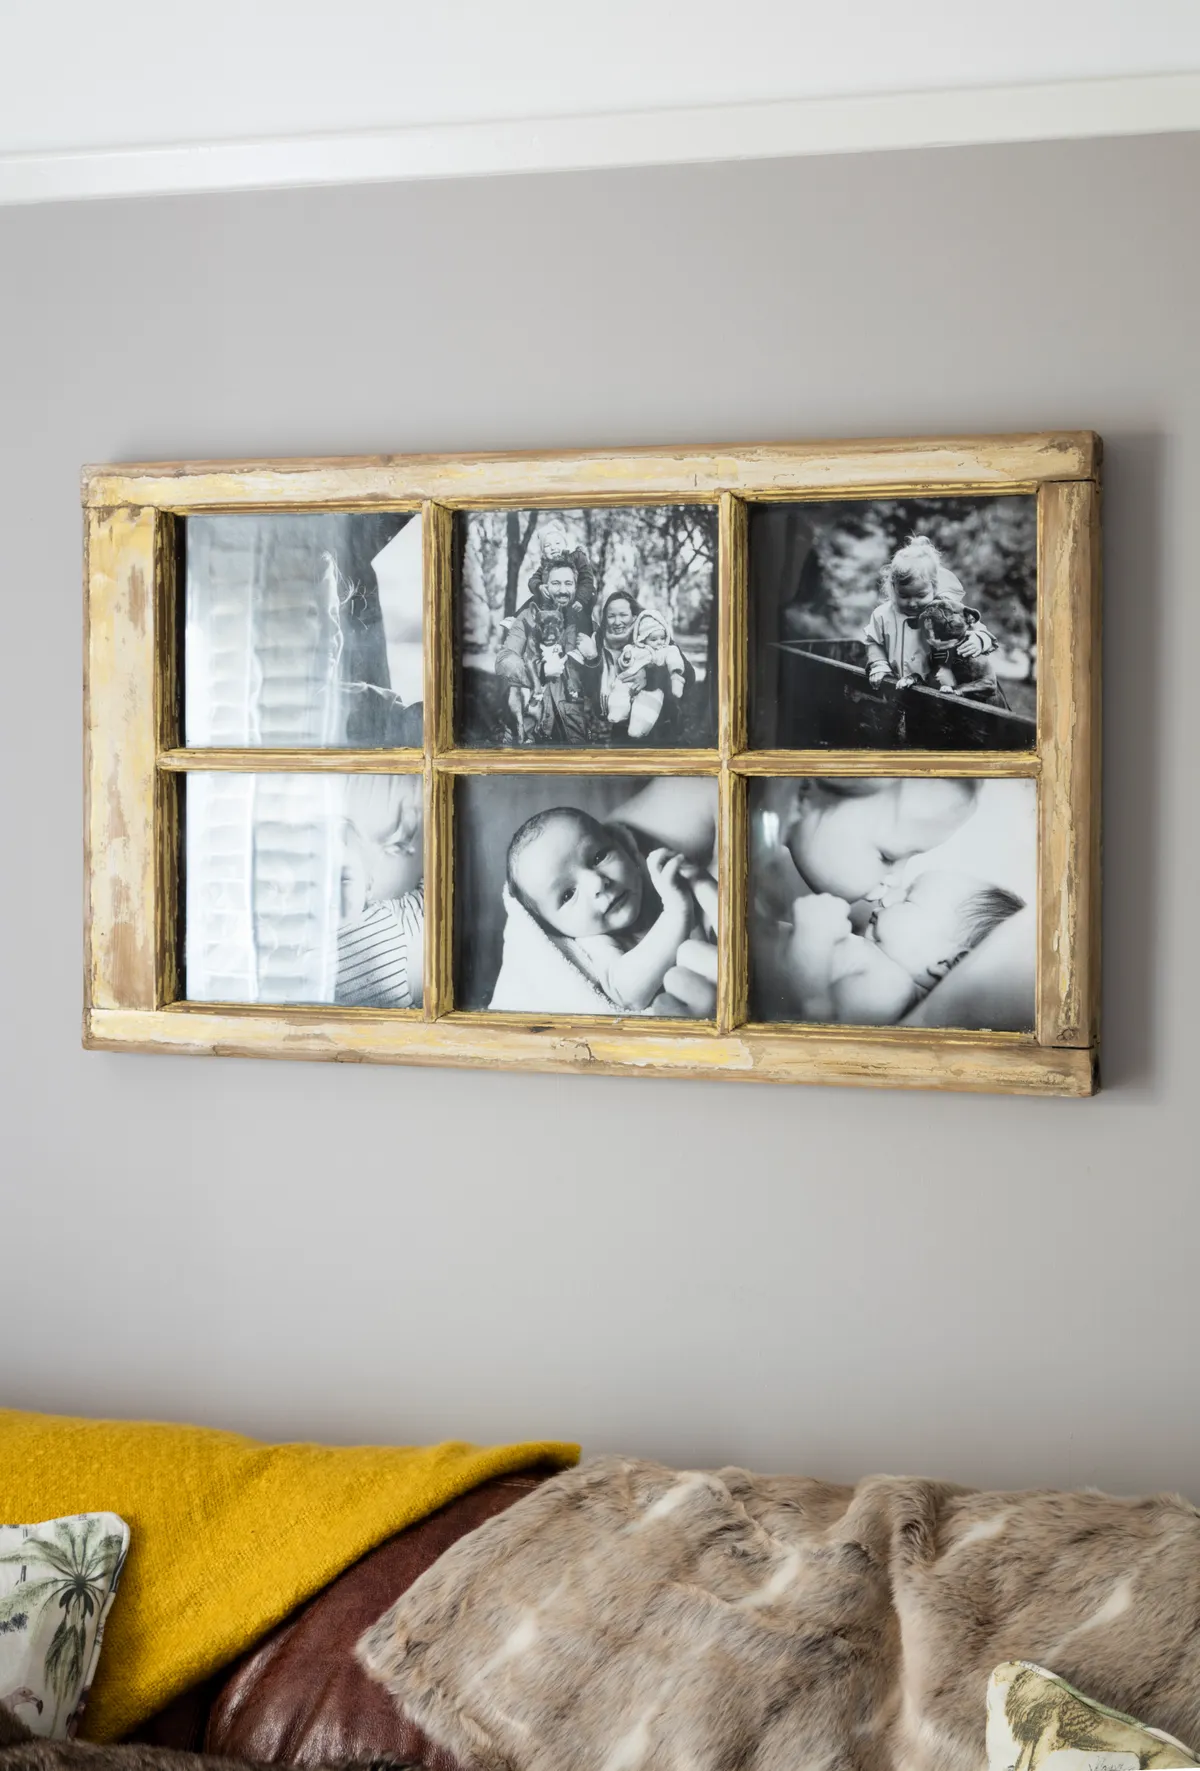 A photo frame made out of an old window